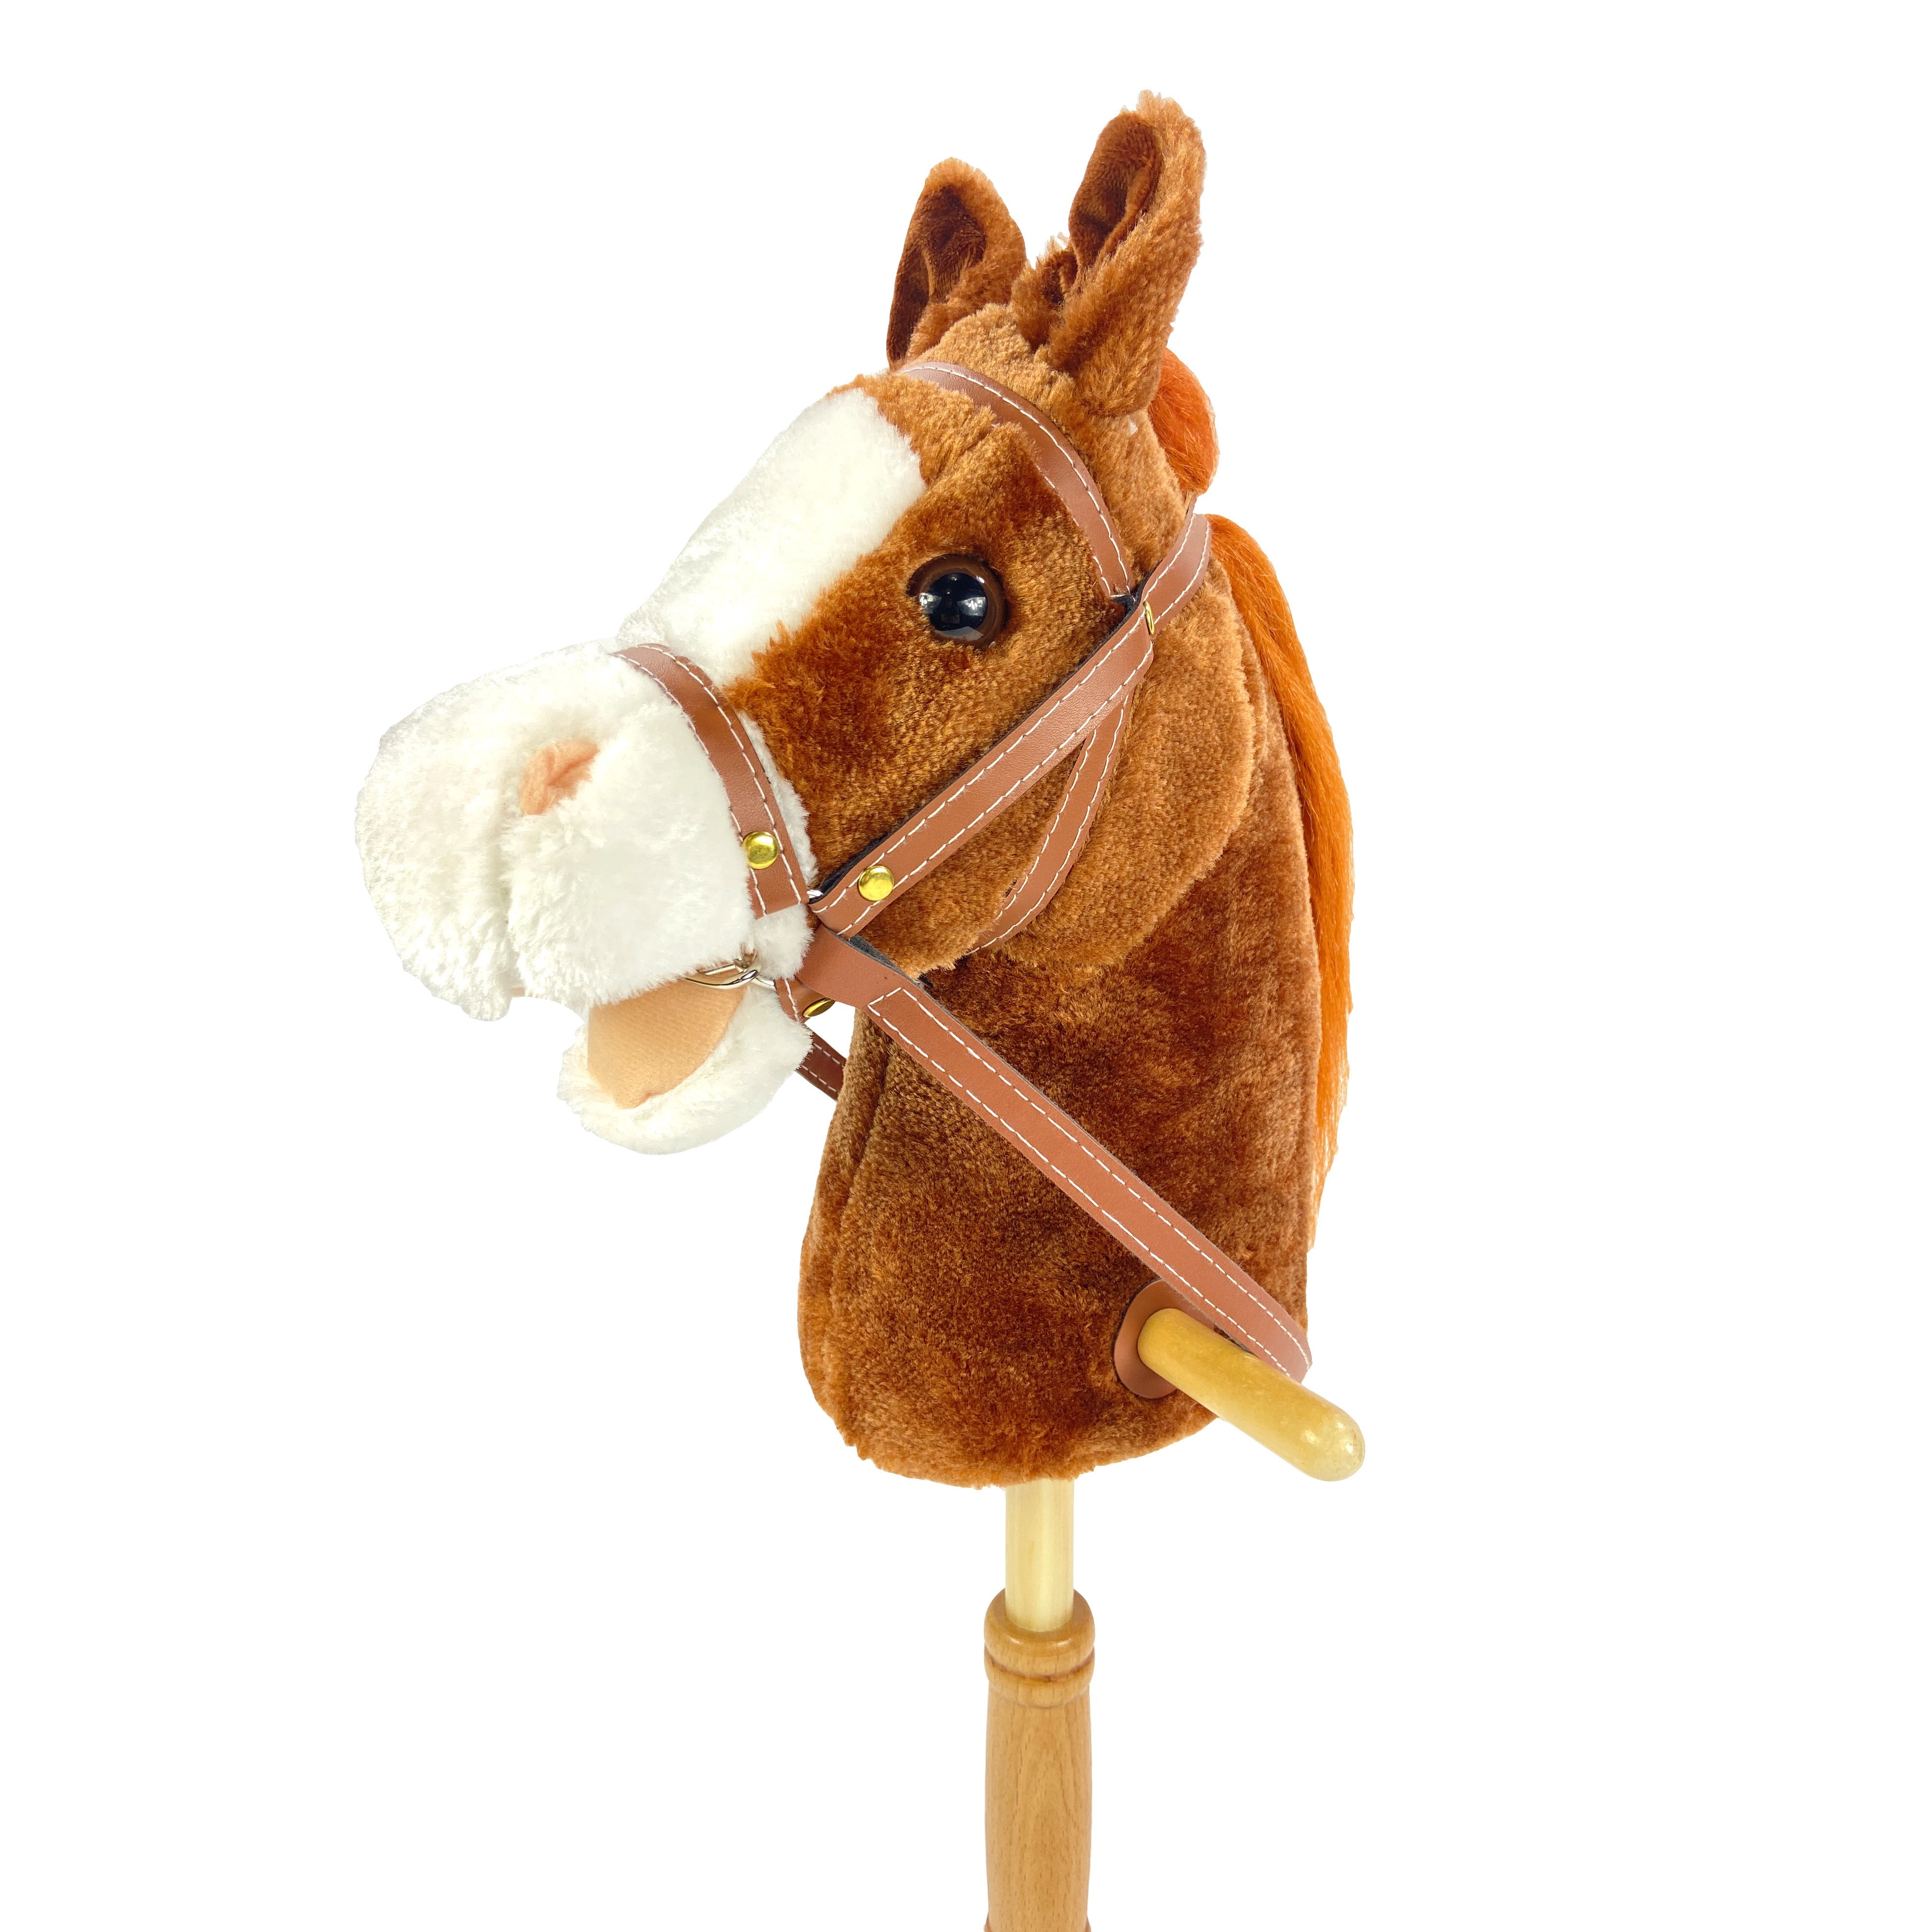 Great Wholesale Horse Measuring Stick At Astounding Prices 